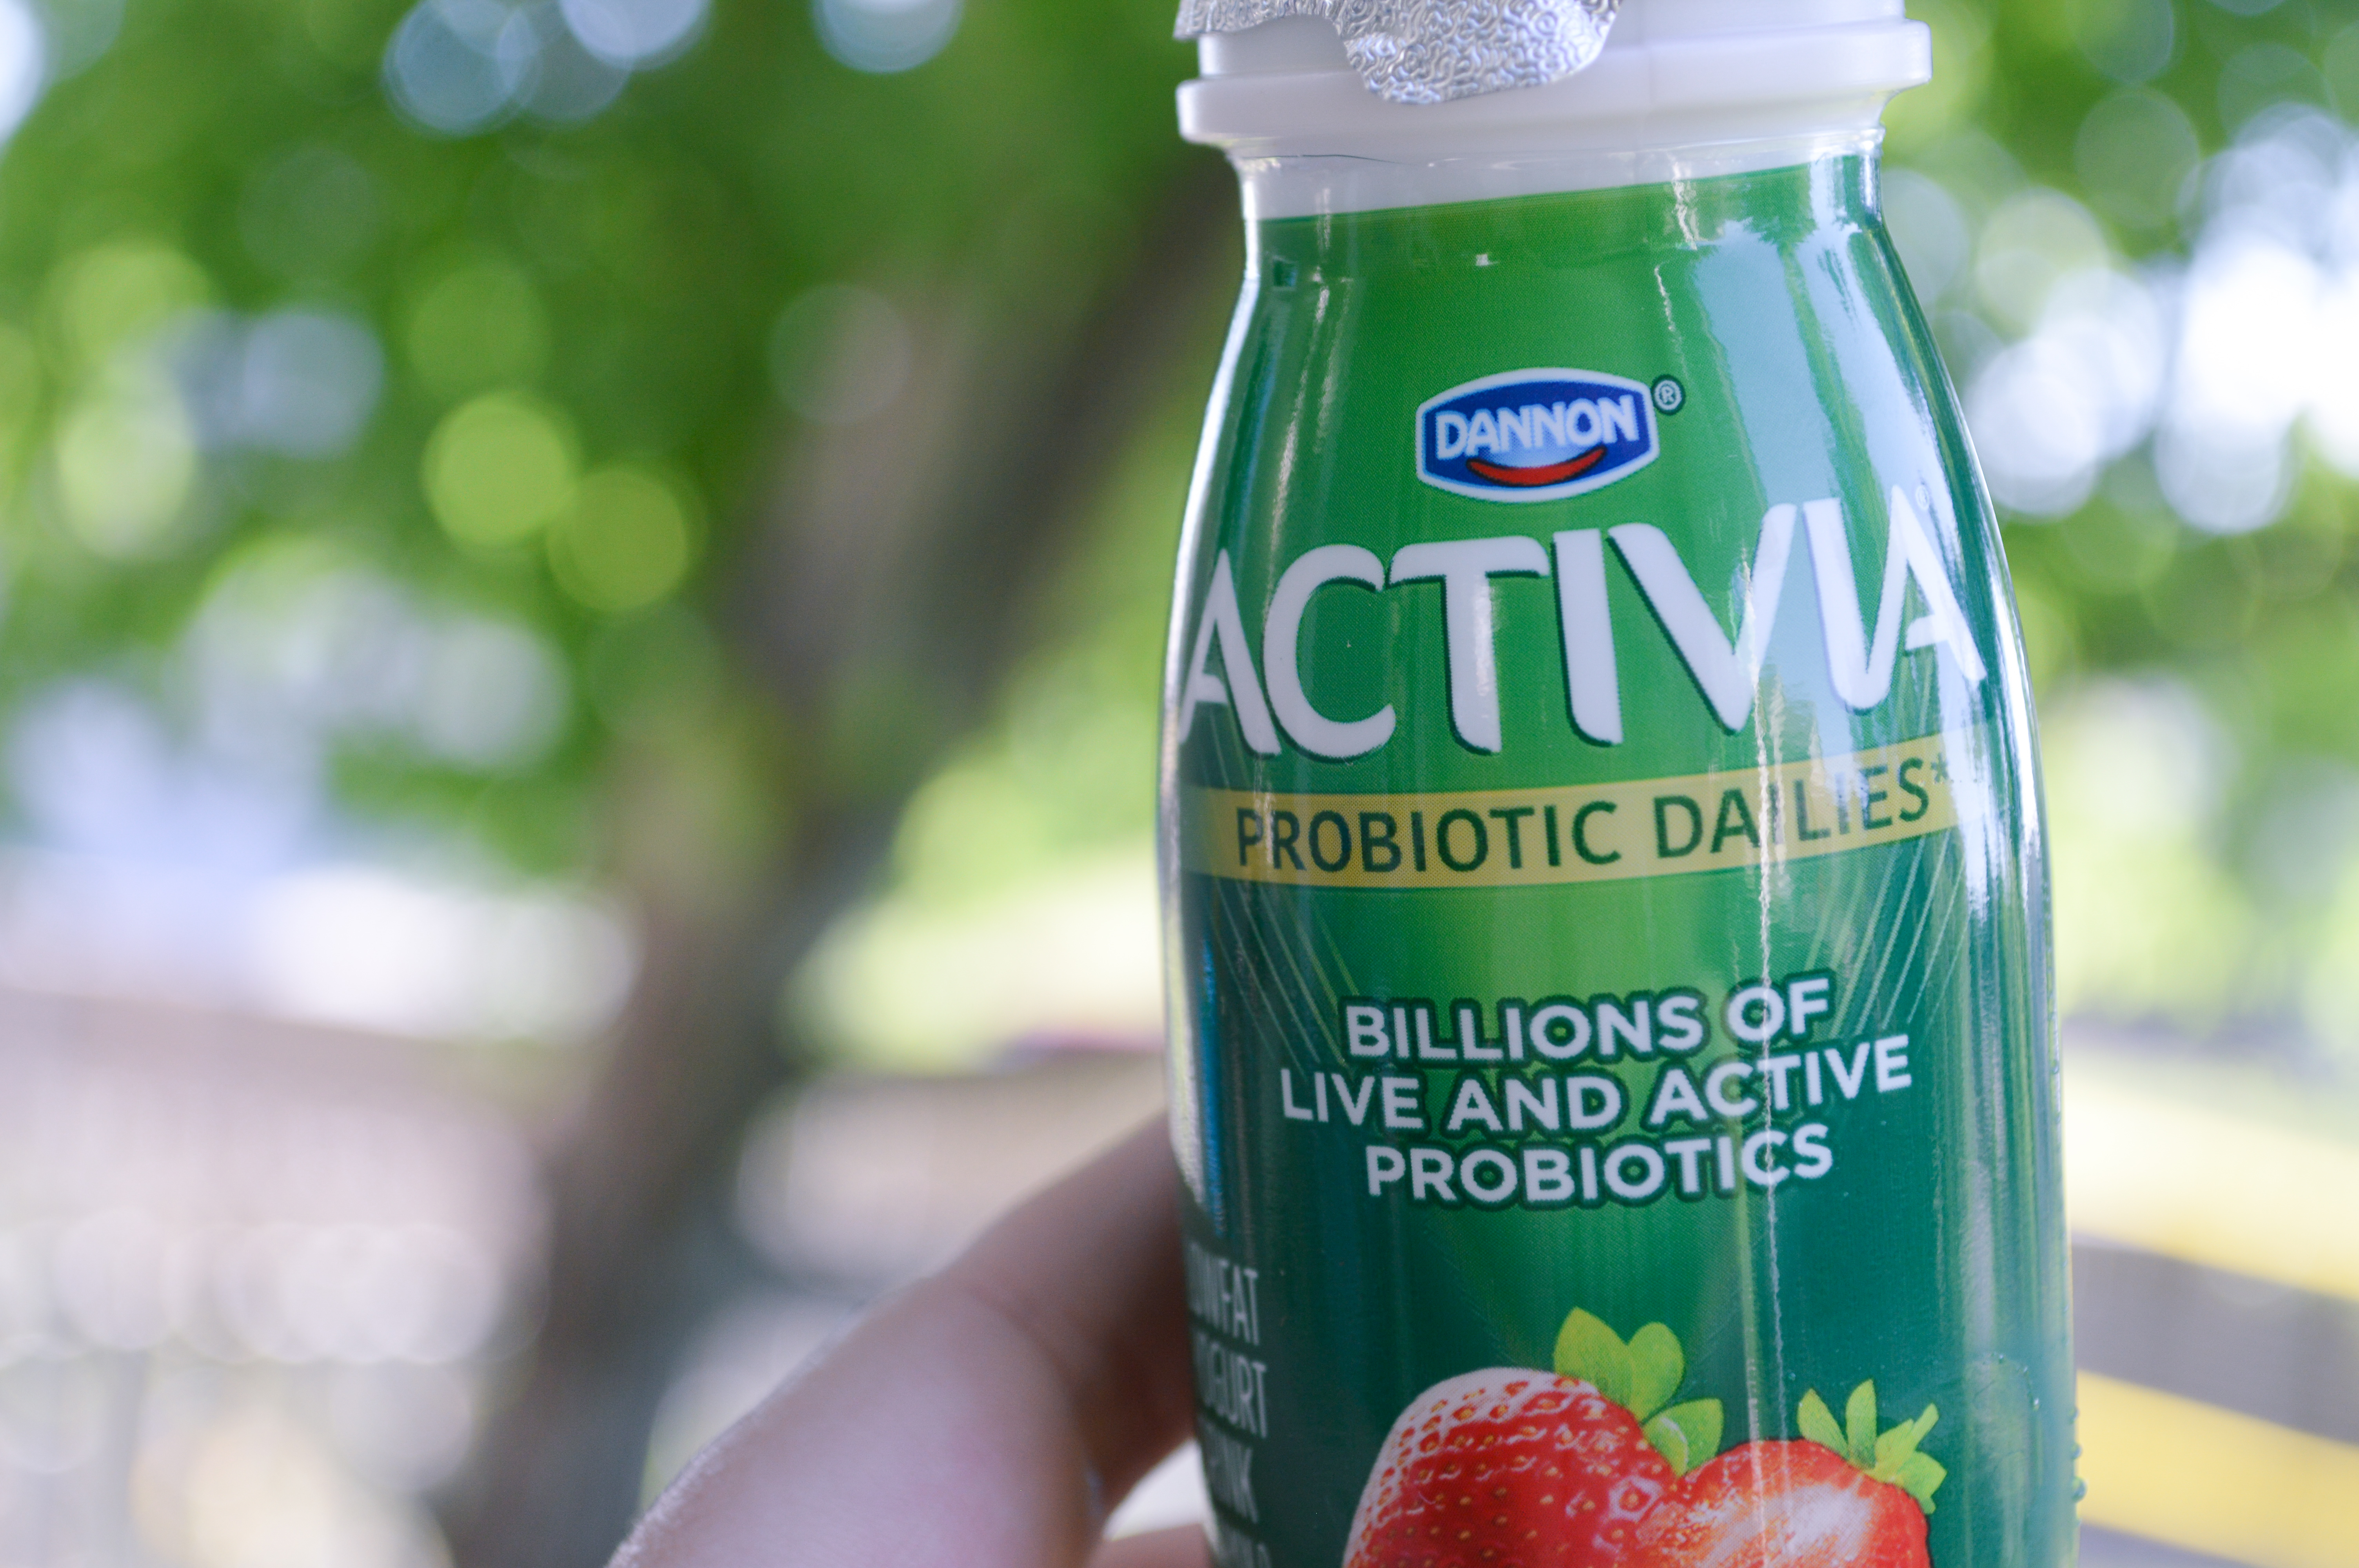 Making Health a Priority with Activia Probiotic Dailies featured by popular Denver lifestyle blogger, All Things Lovely